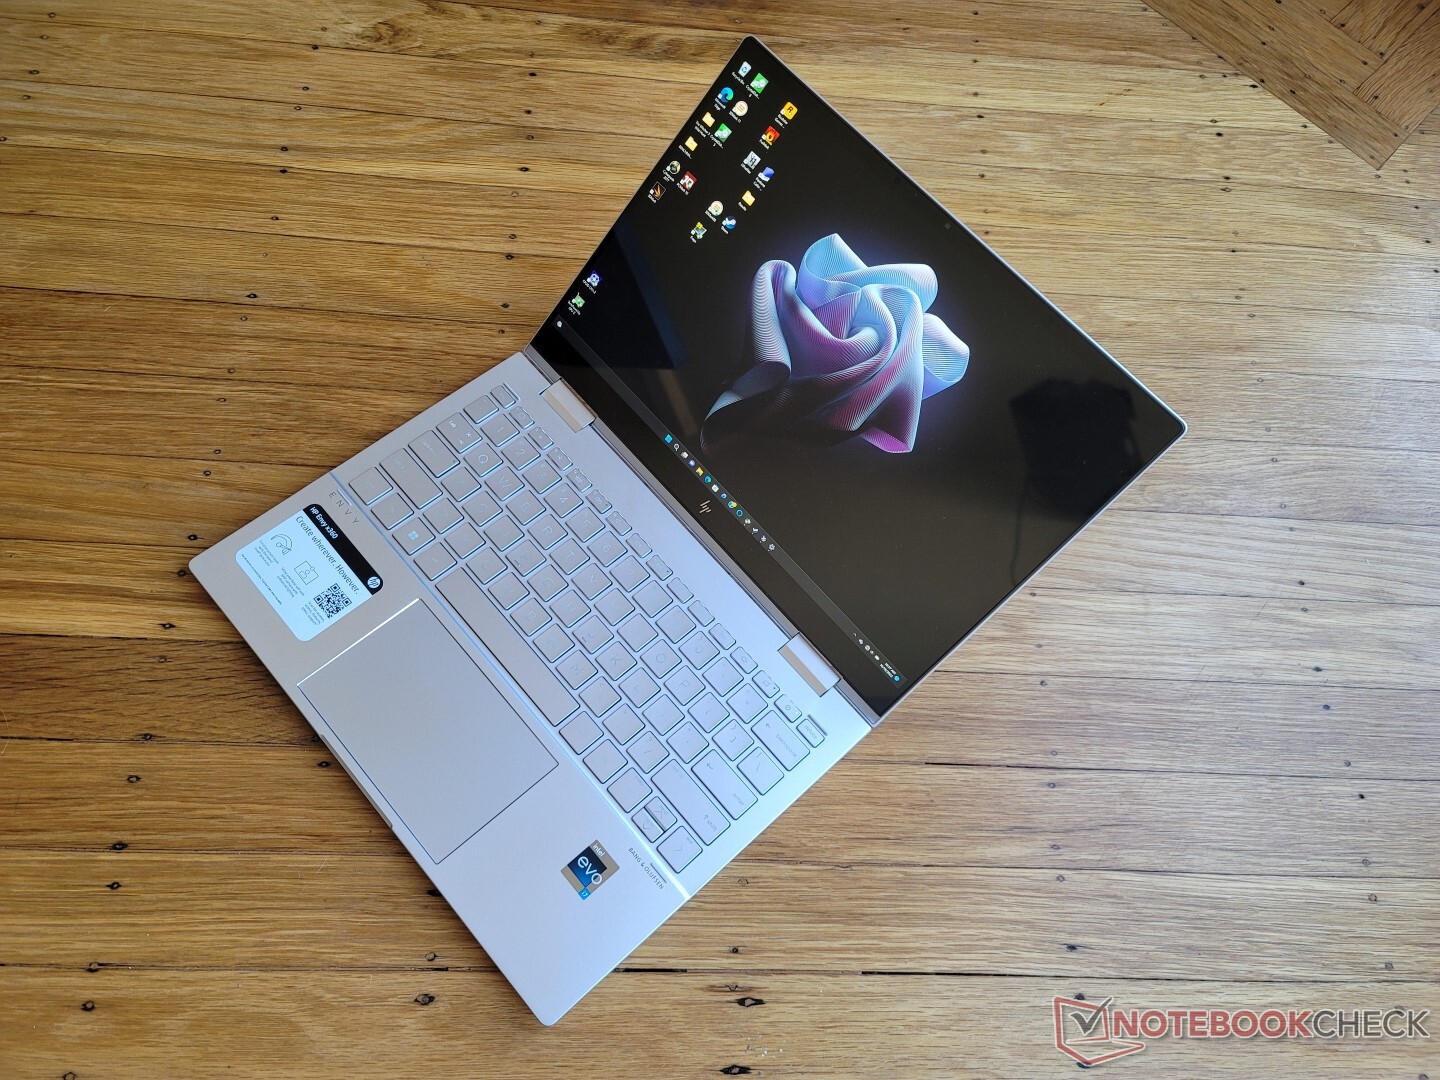 Best Buy discounting the latest HP Envy x360 13 with 8 GB of fixed